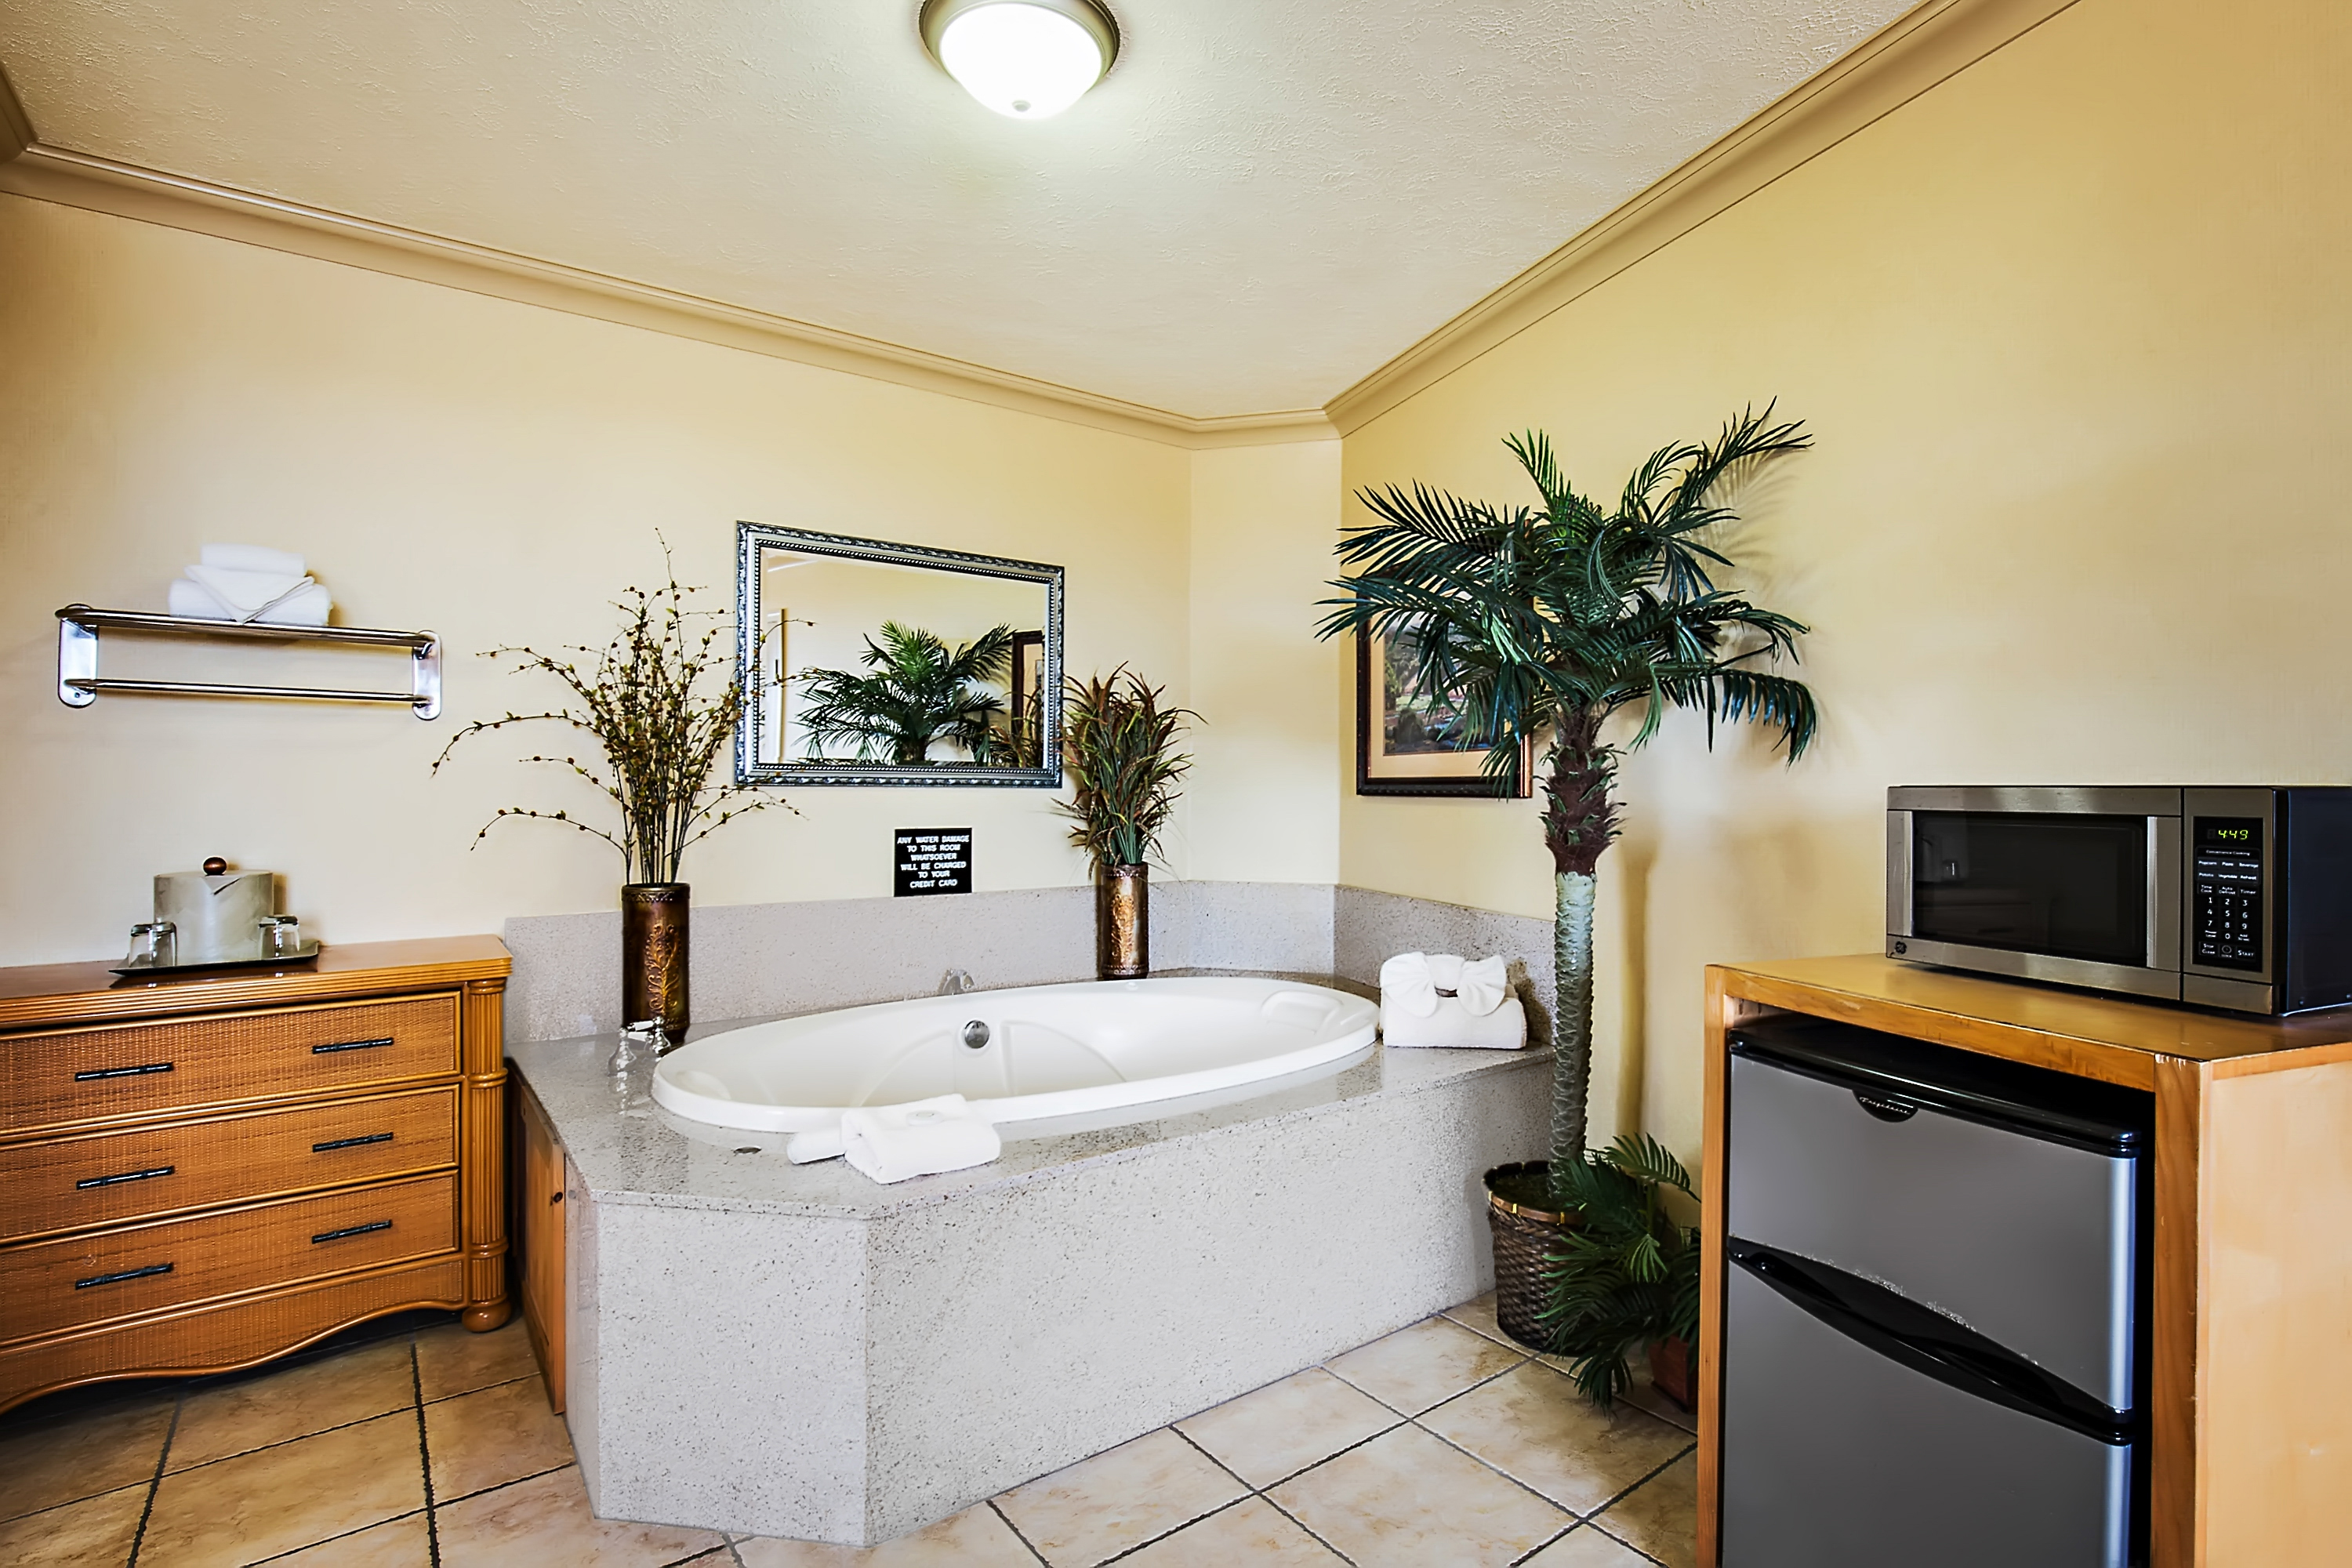 Whirlpool Tub Rooms at The Beachcomber Motel - Fort Bragg Mendocino CA